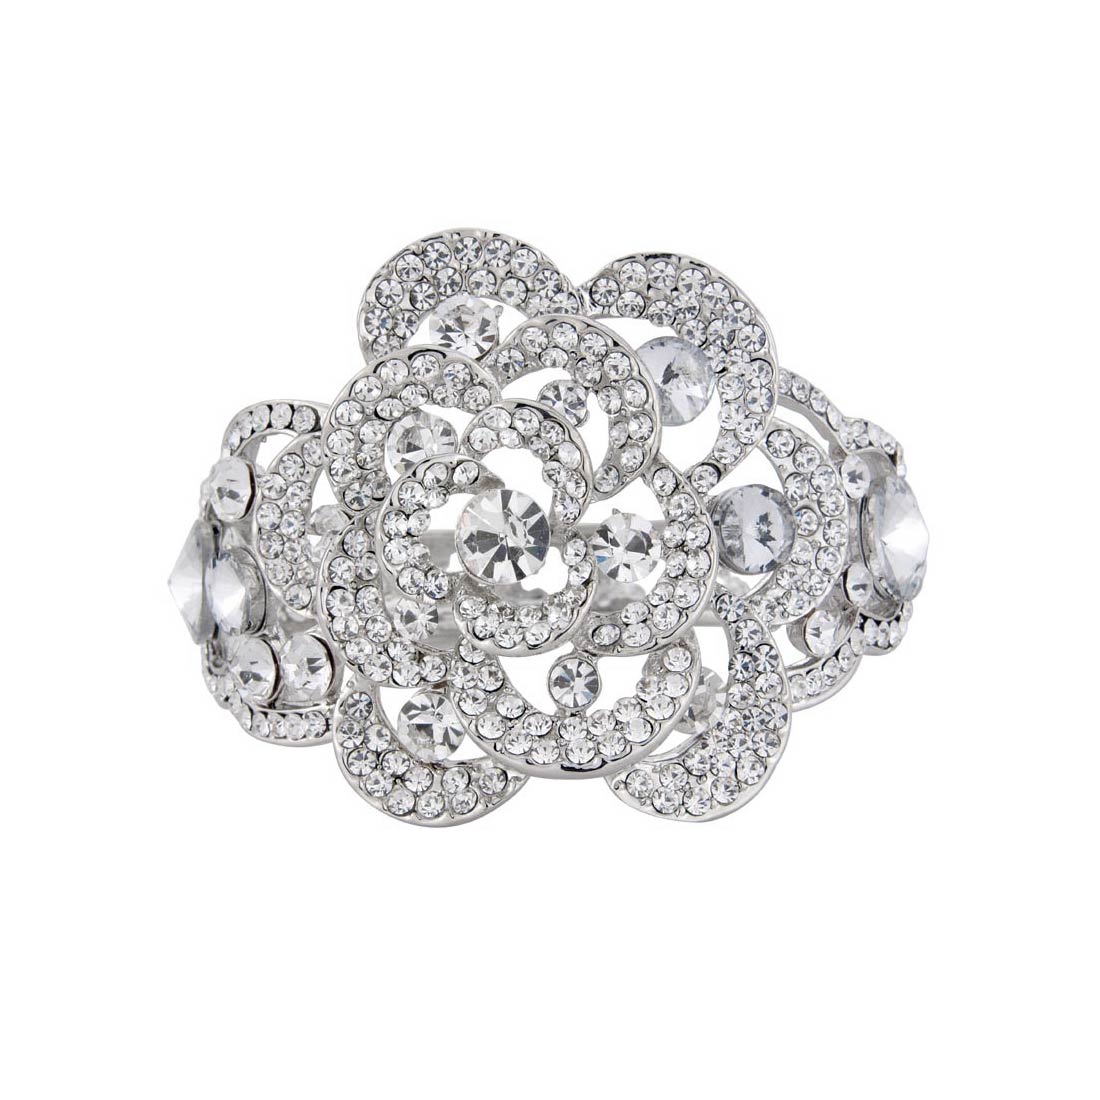 Forties Extravagance Statement Crystal Flower Cuff Bangle